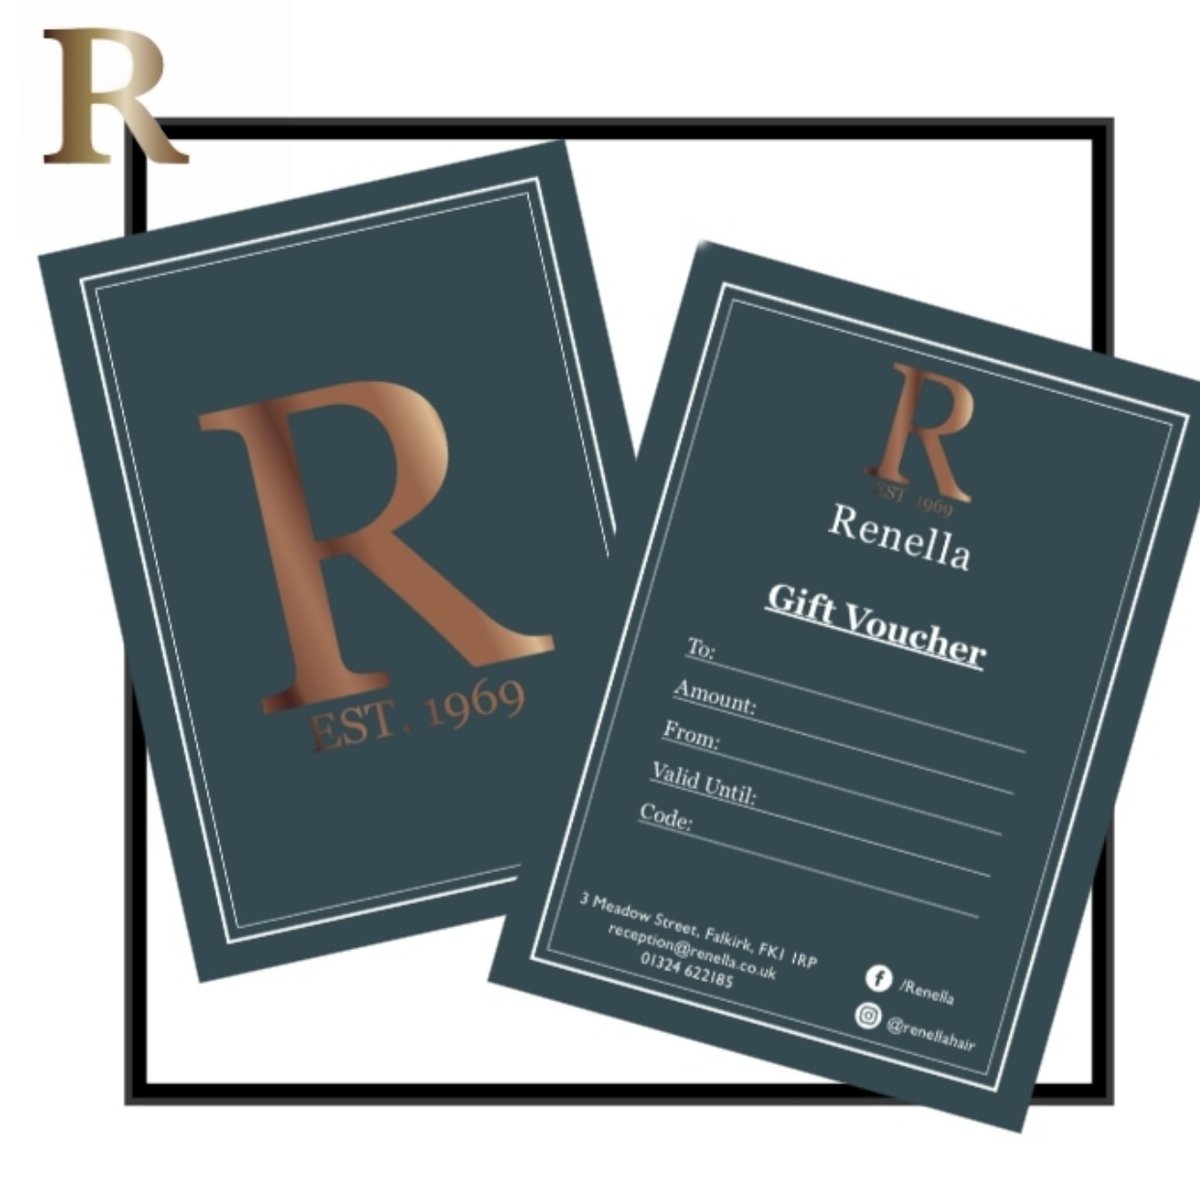 Looking for a gift that family and friends would love to receive? Our gift vouchers are the prefect present. Available in salon or by clicking here: renella.co.uk/products/gift-… give the gift of haircare.